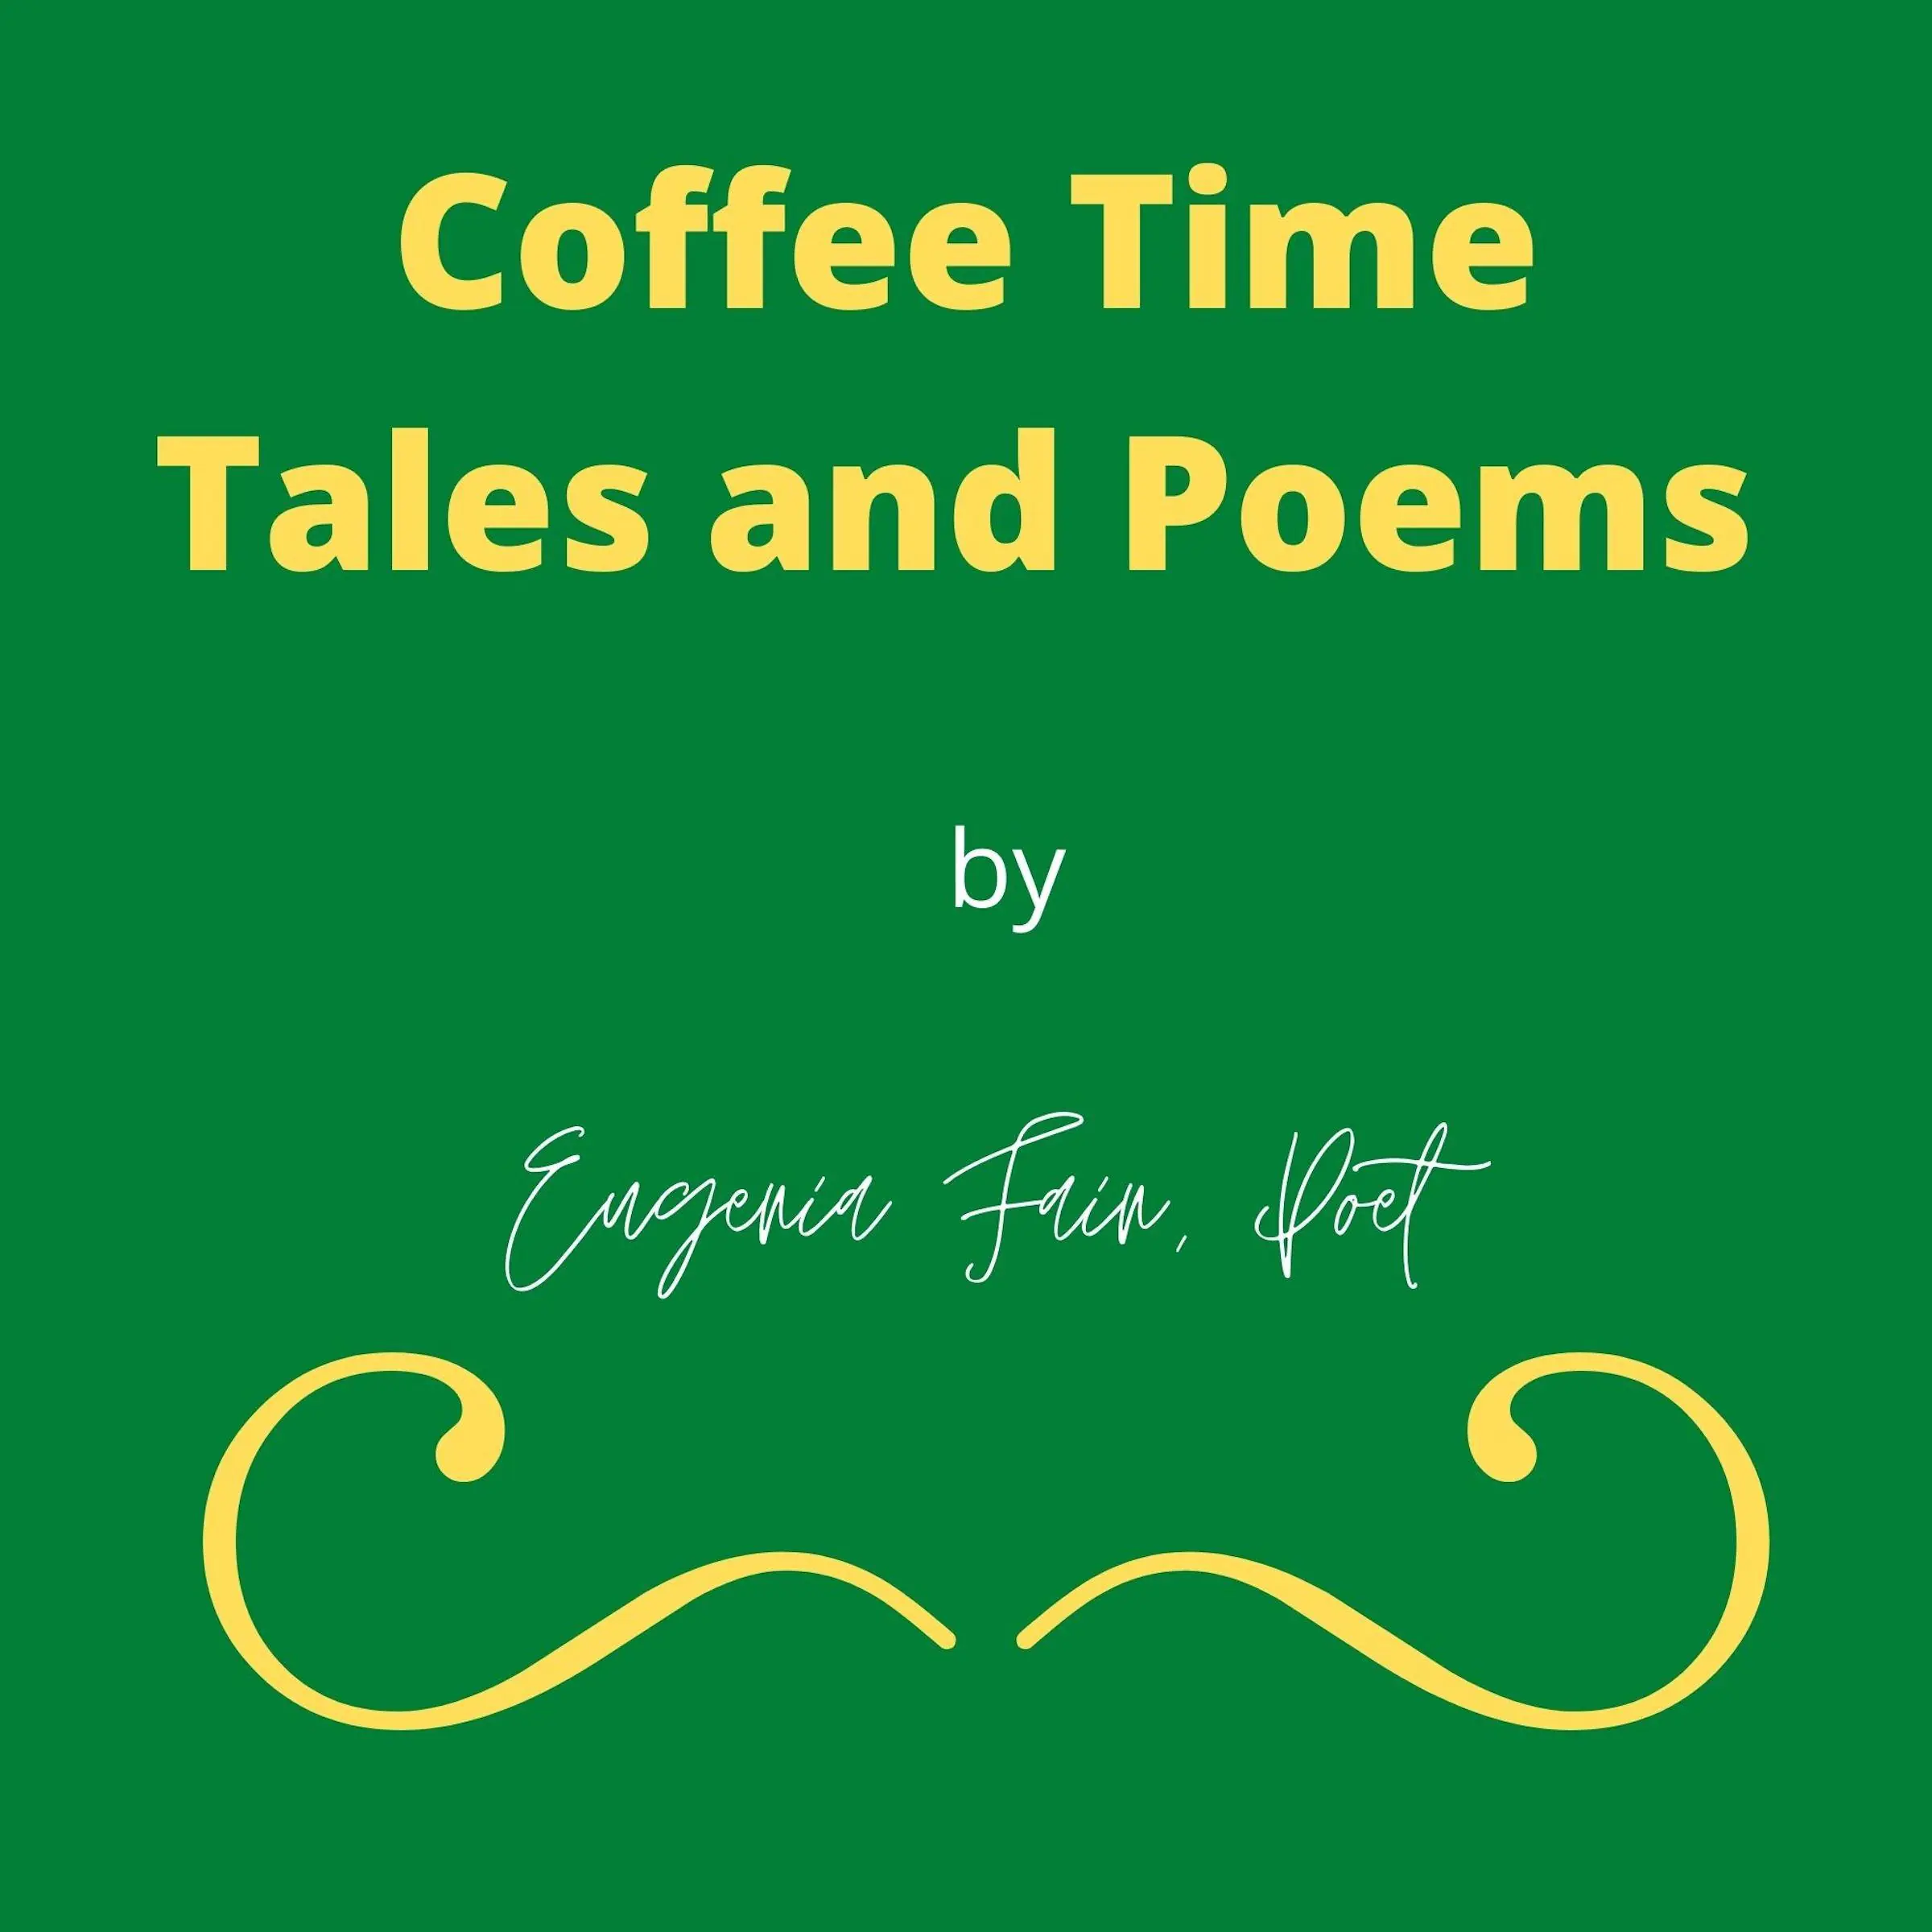 Coffee Time Tales and Poems by Eugenia Fain Audiobook